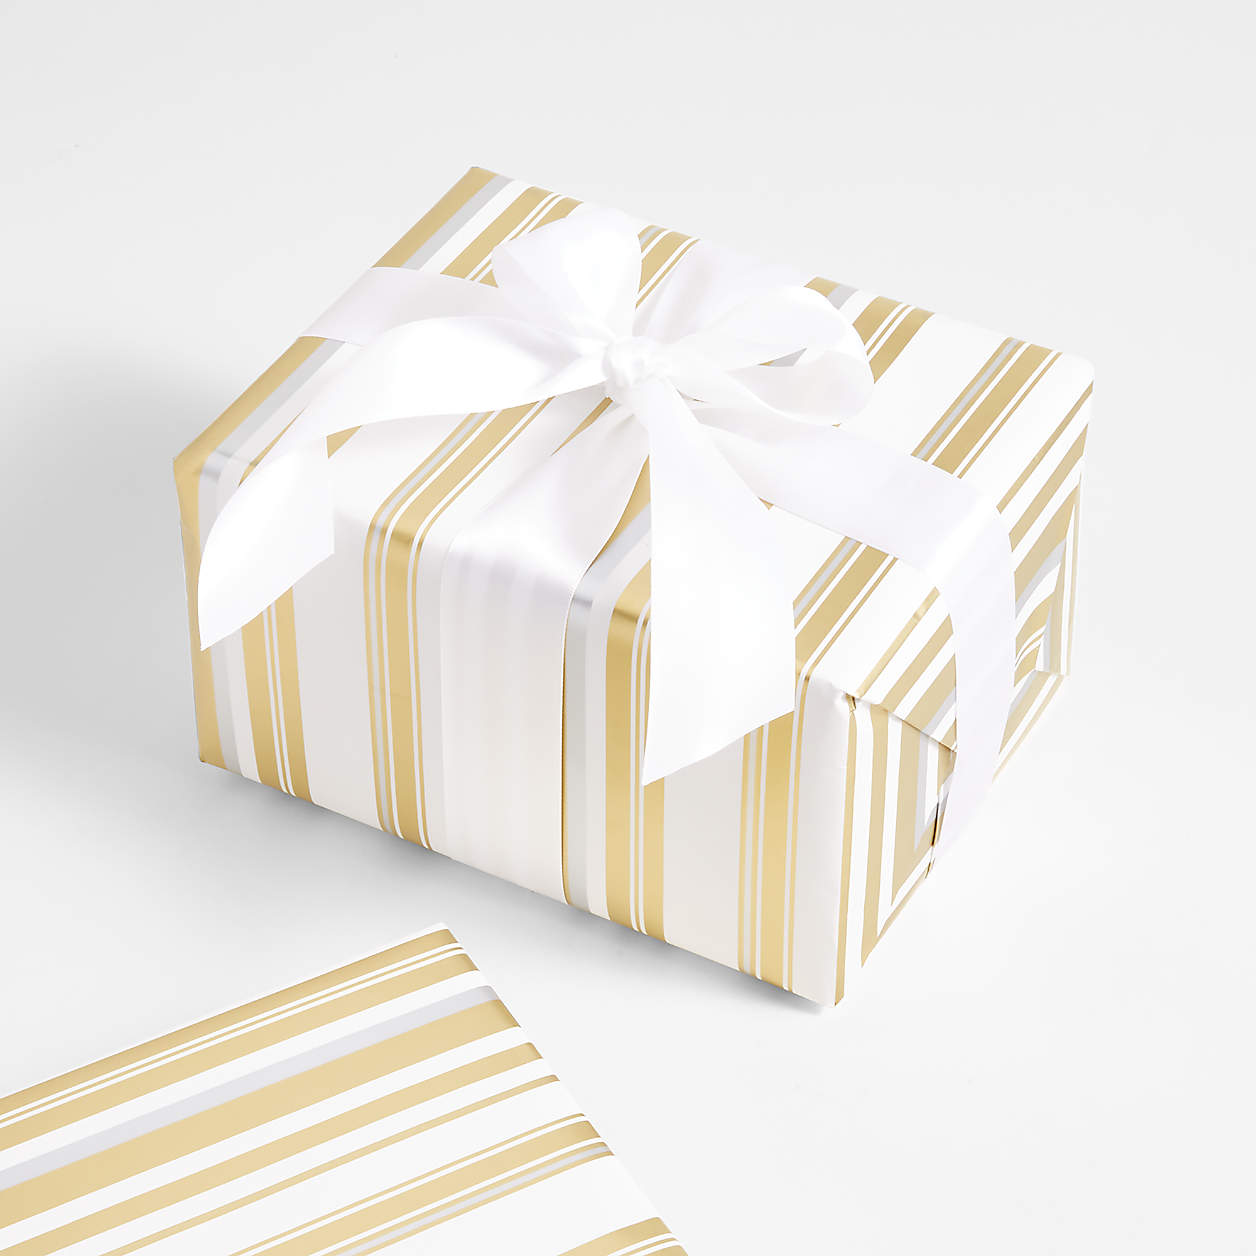 Christmas Gift Wrapping Paper-Red and White Paper with a Metallic foil –  Ruspepa